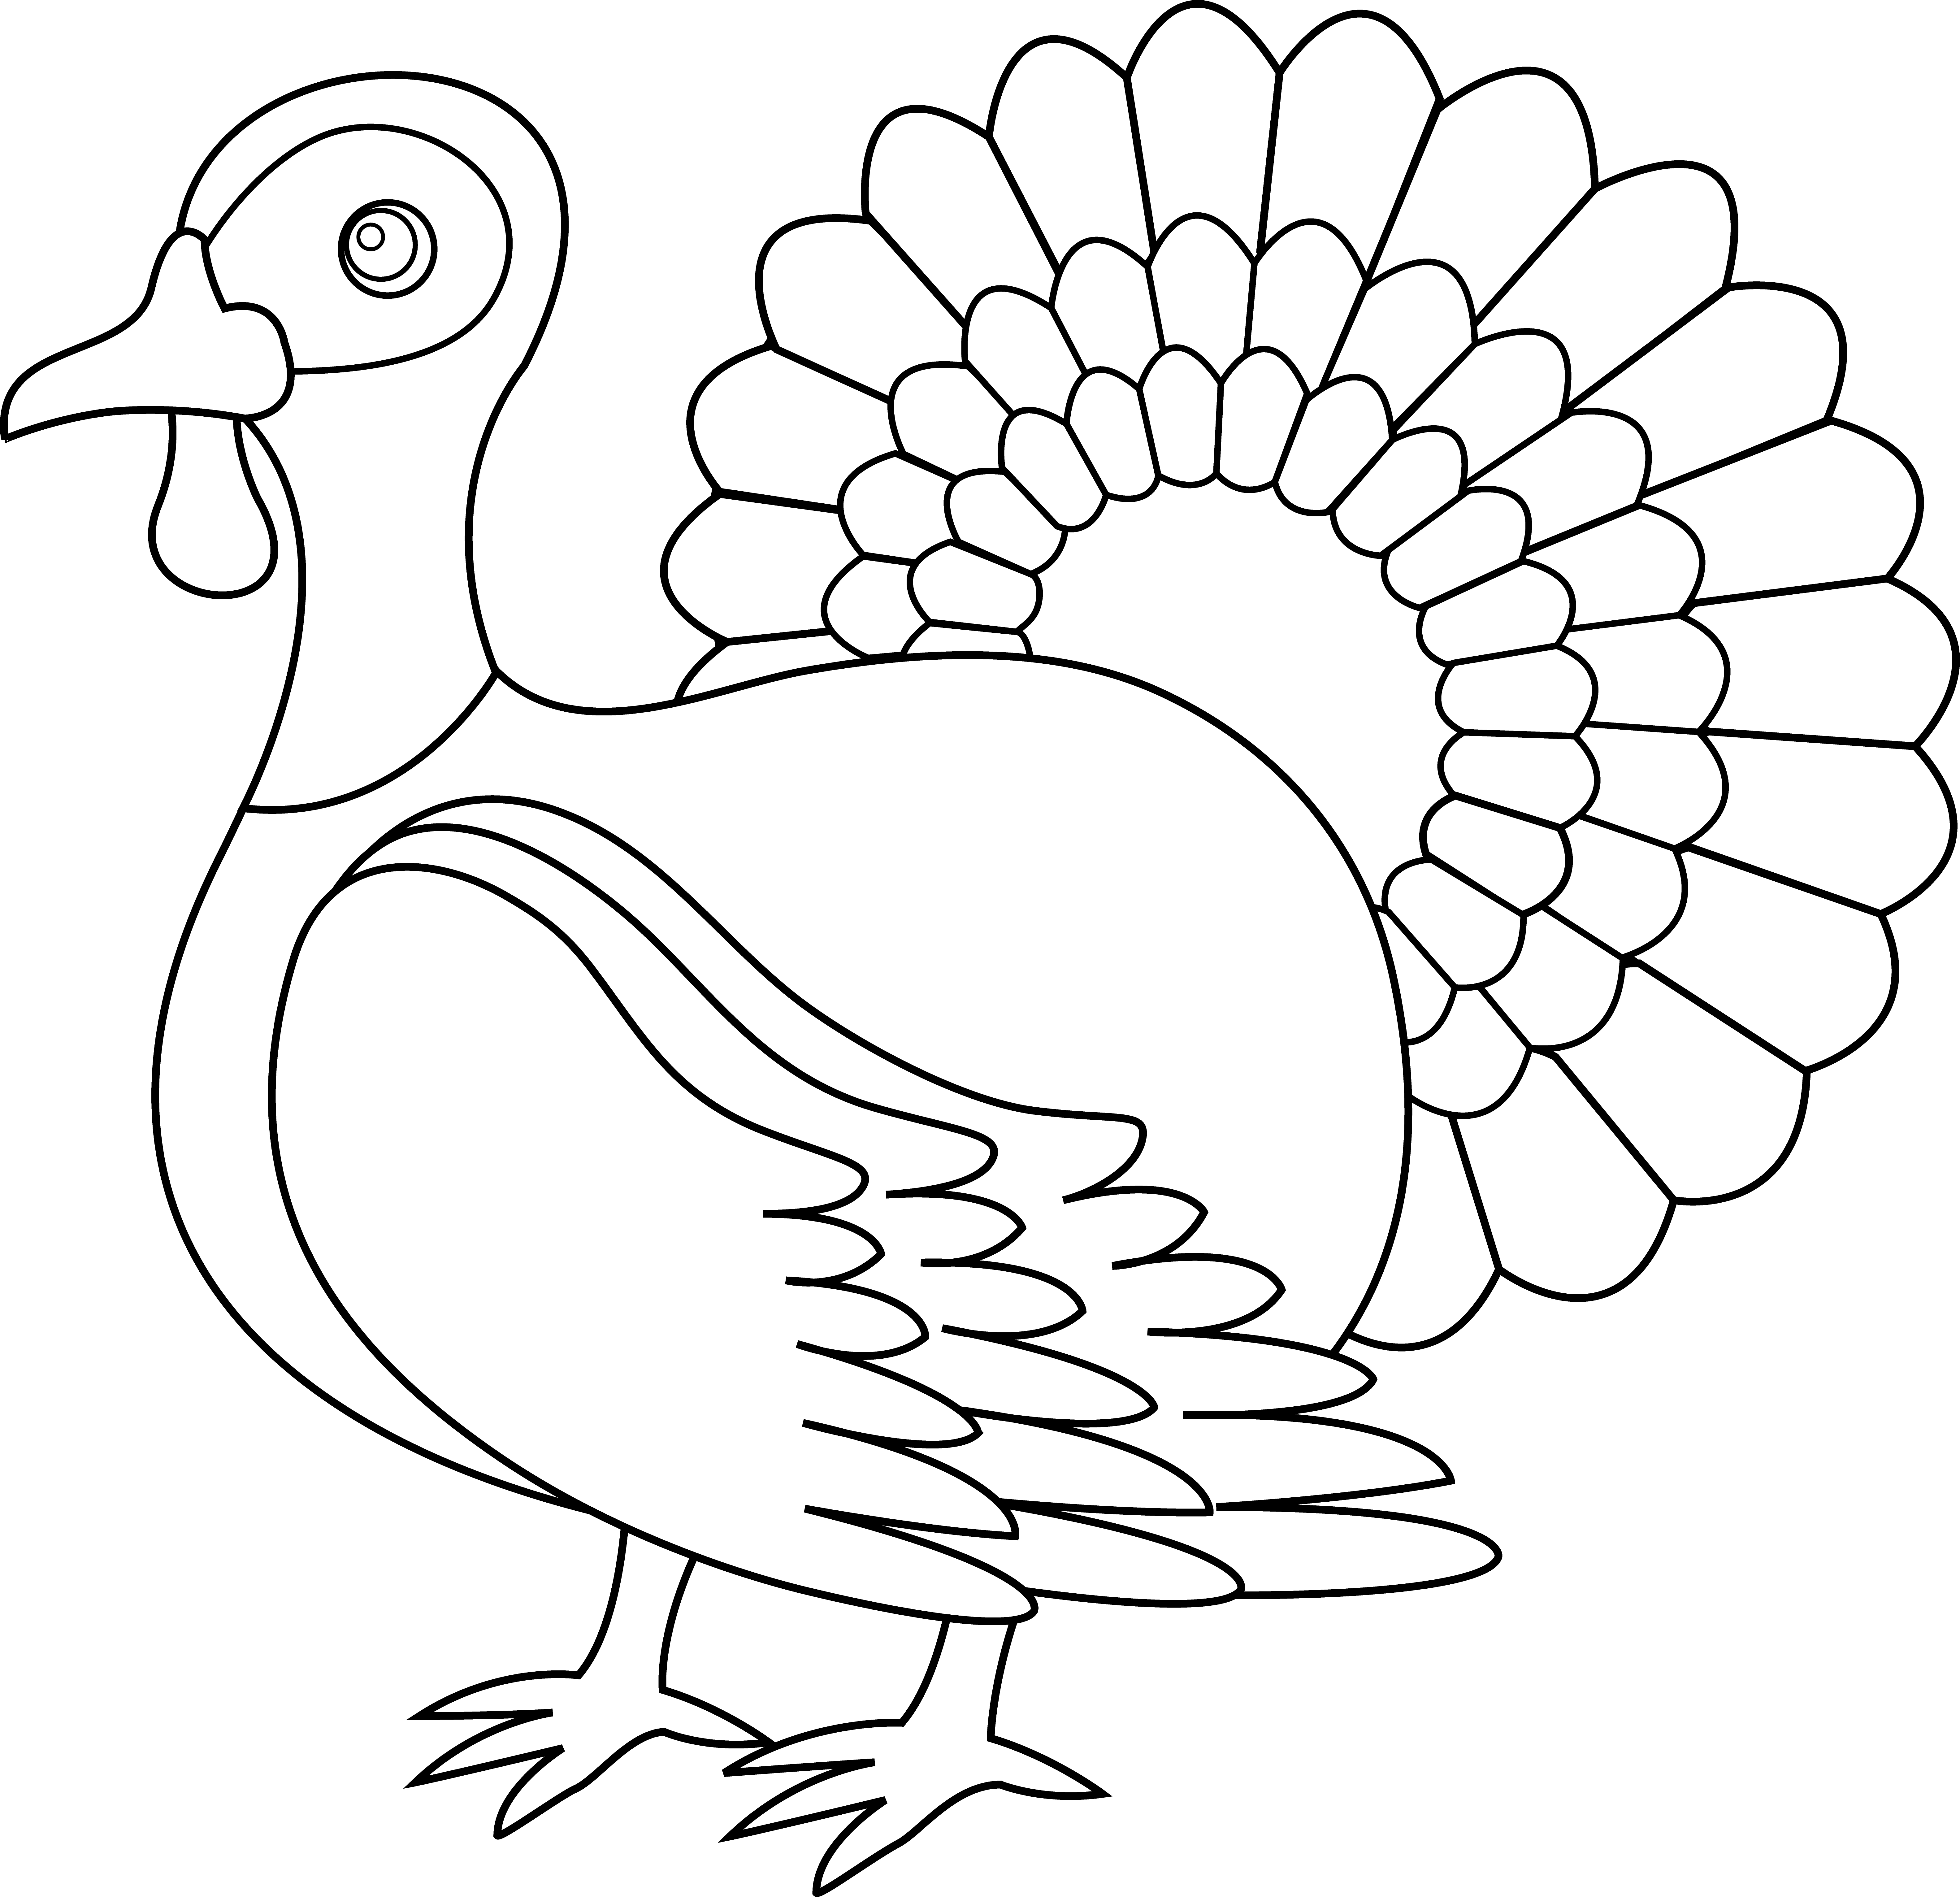 clipart thanksgiving line